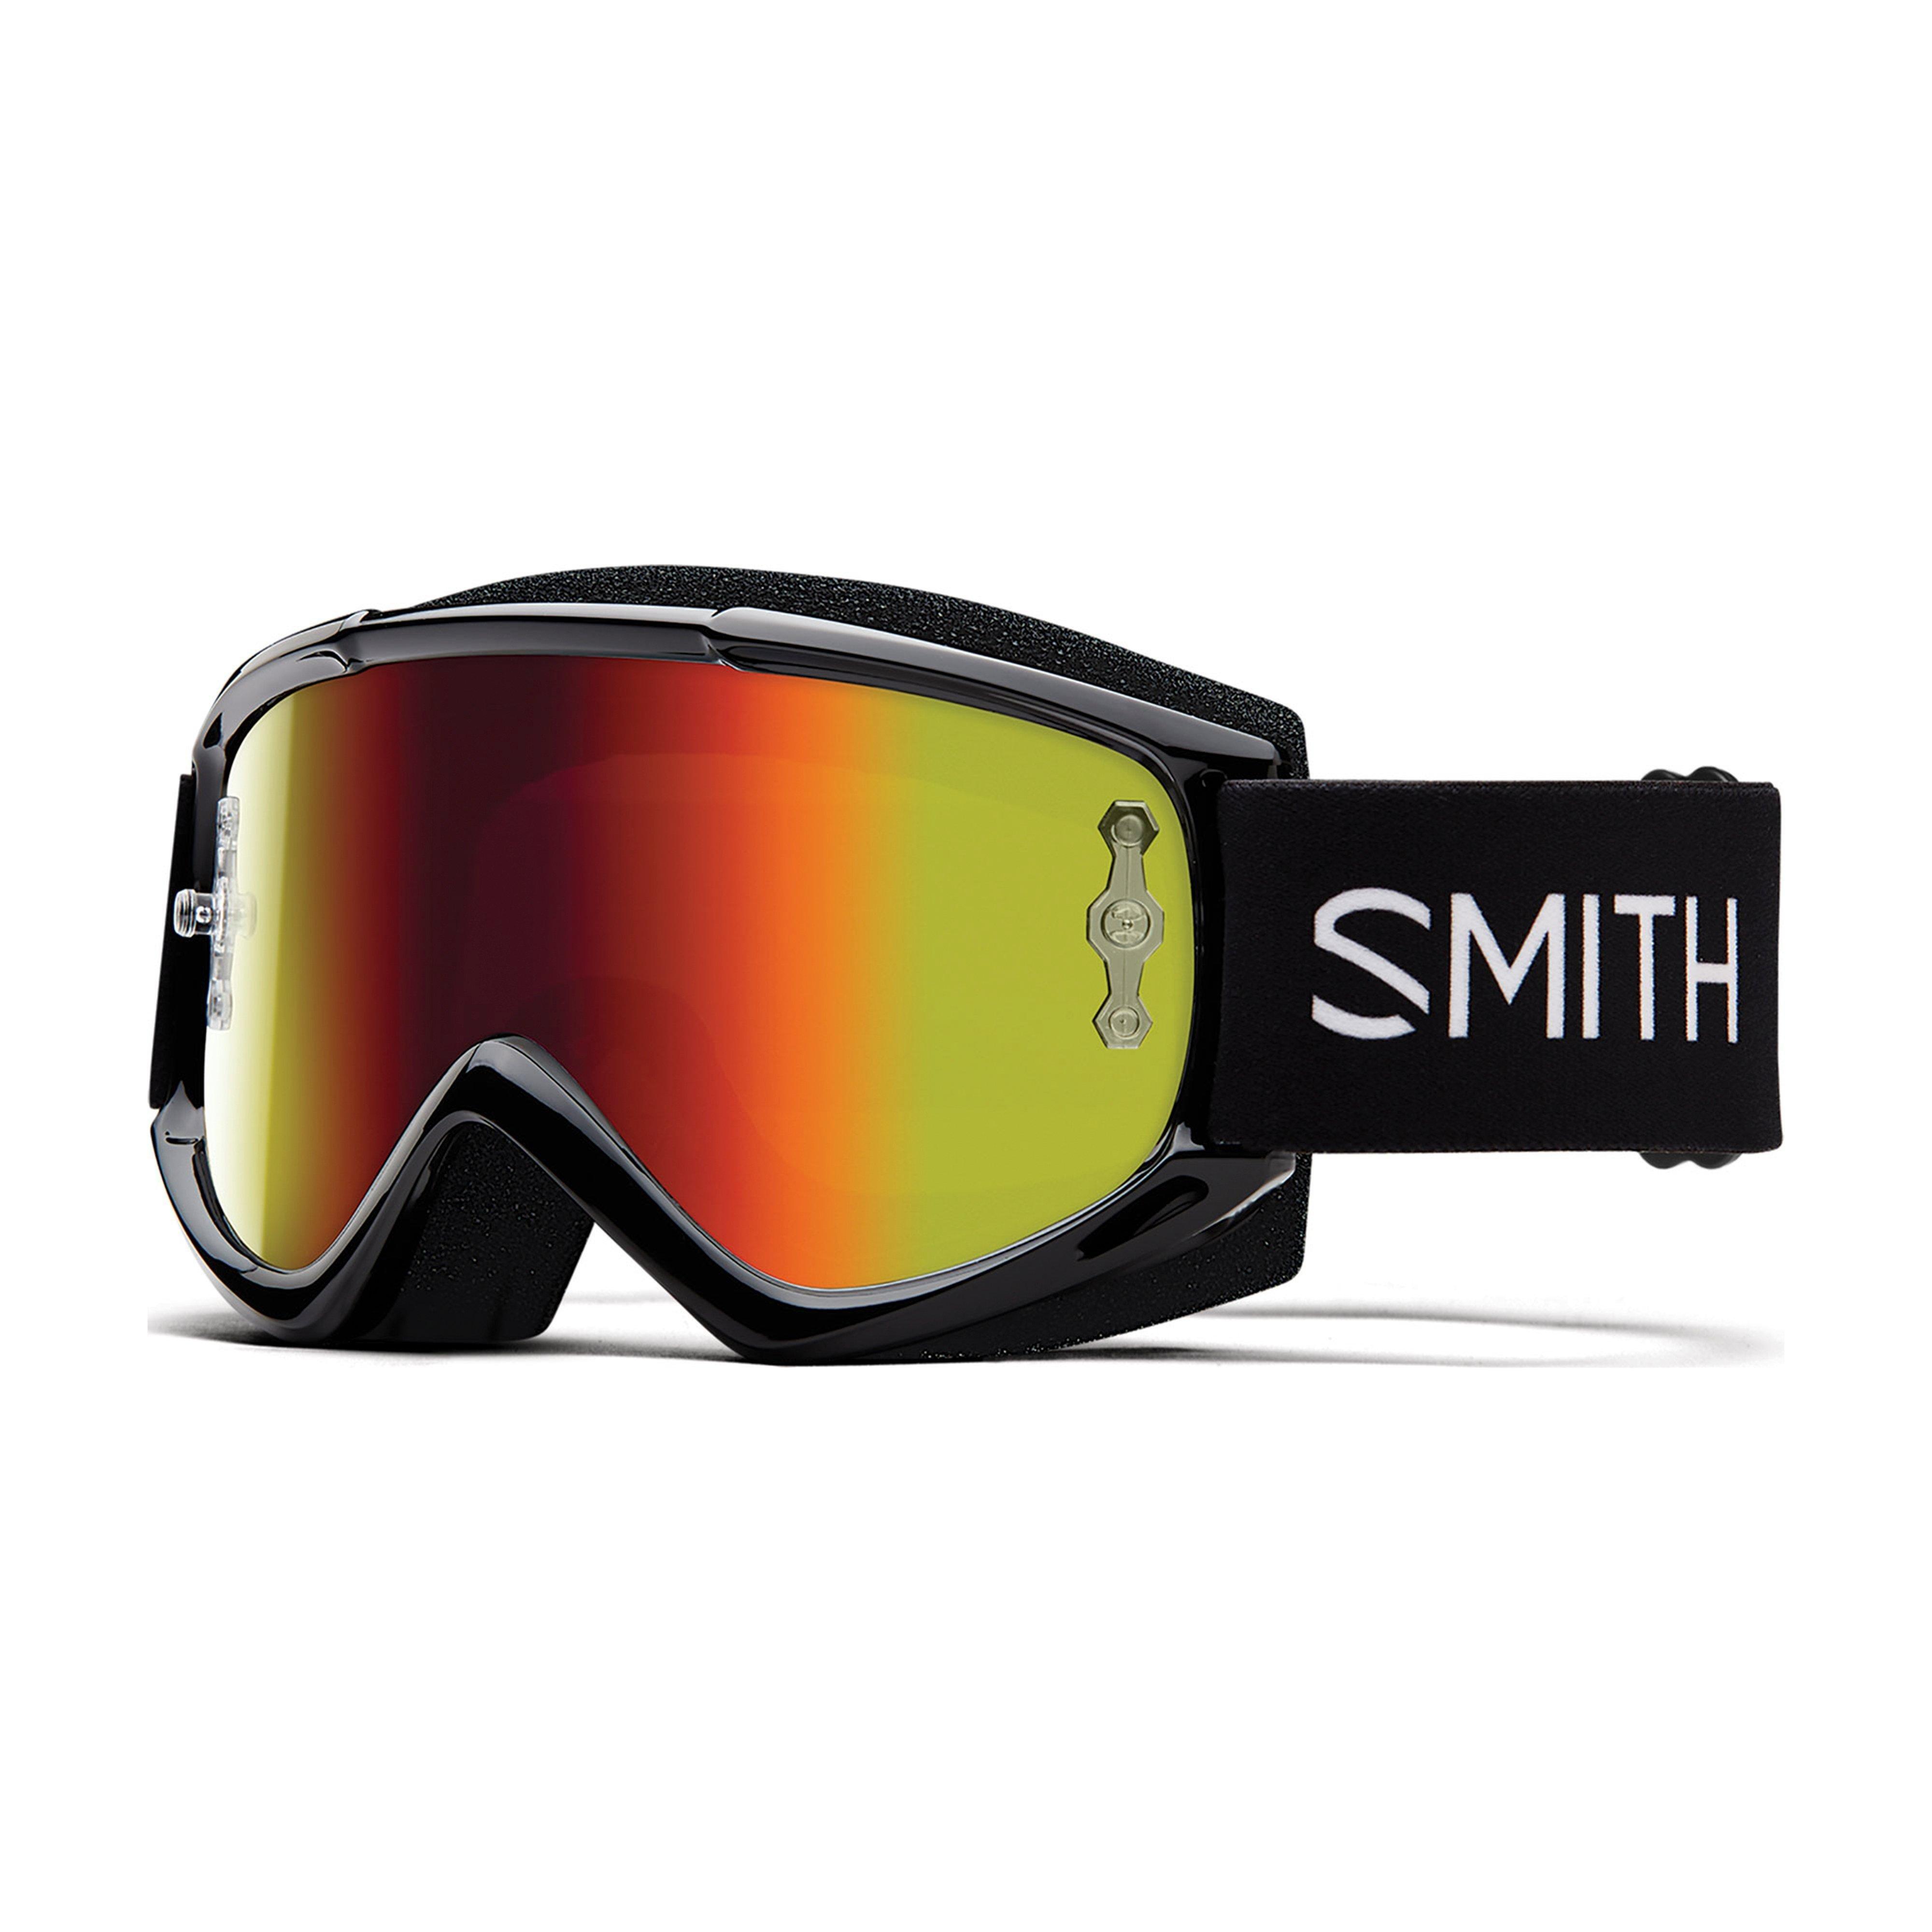 Smith Fuel V2 Bike Goggles Review